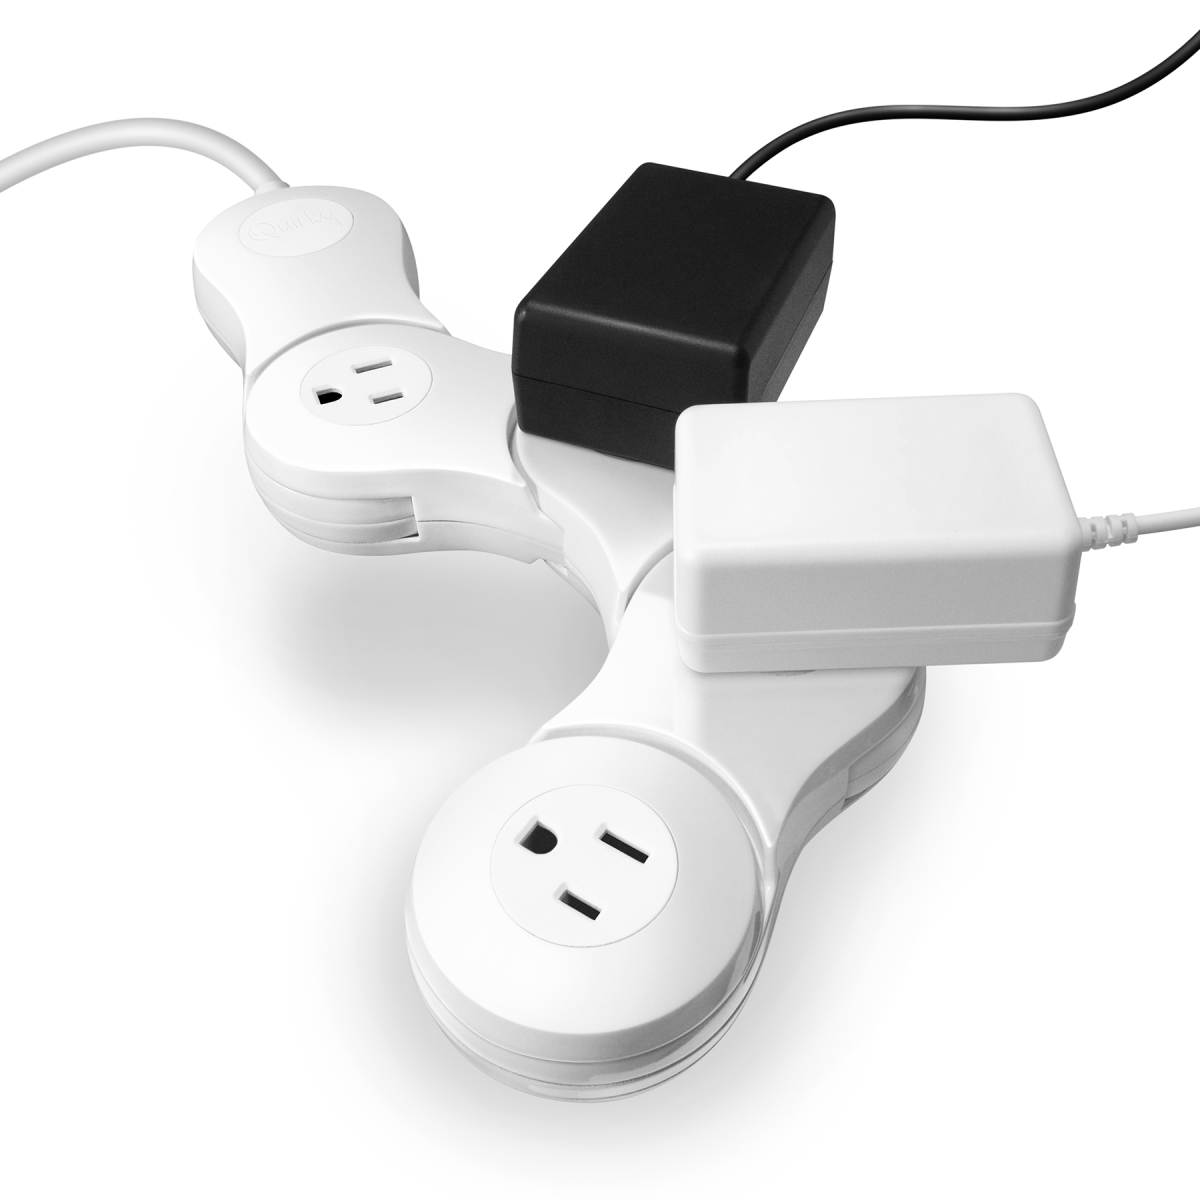 VPVJP-WH01 Pivot Power Junior - 4 Outlet, White -  Quirky